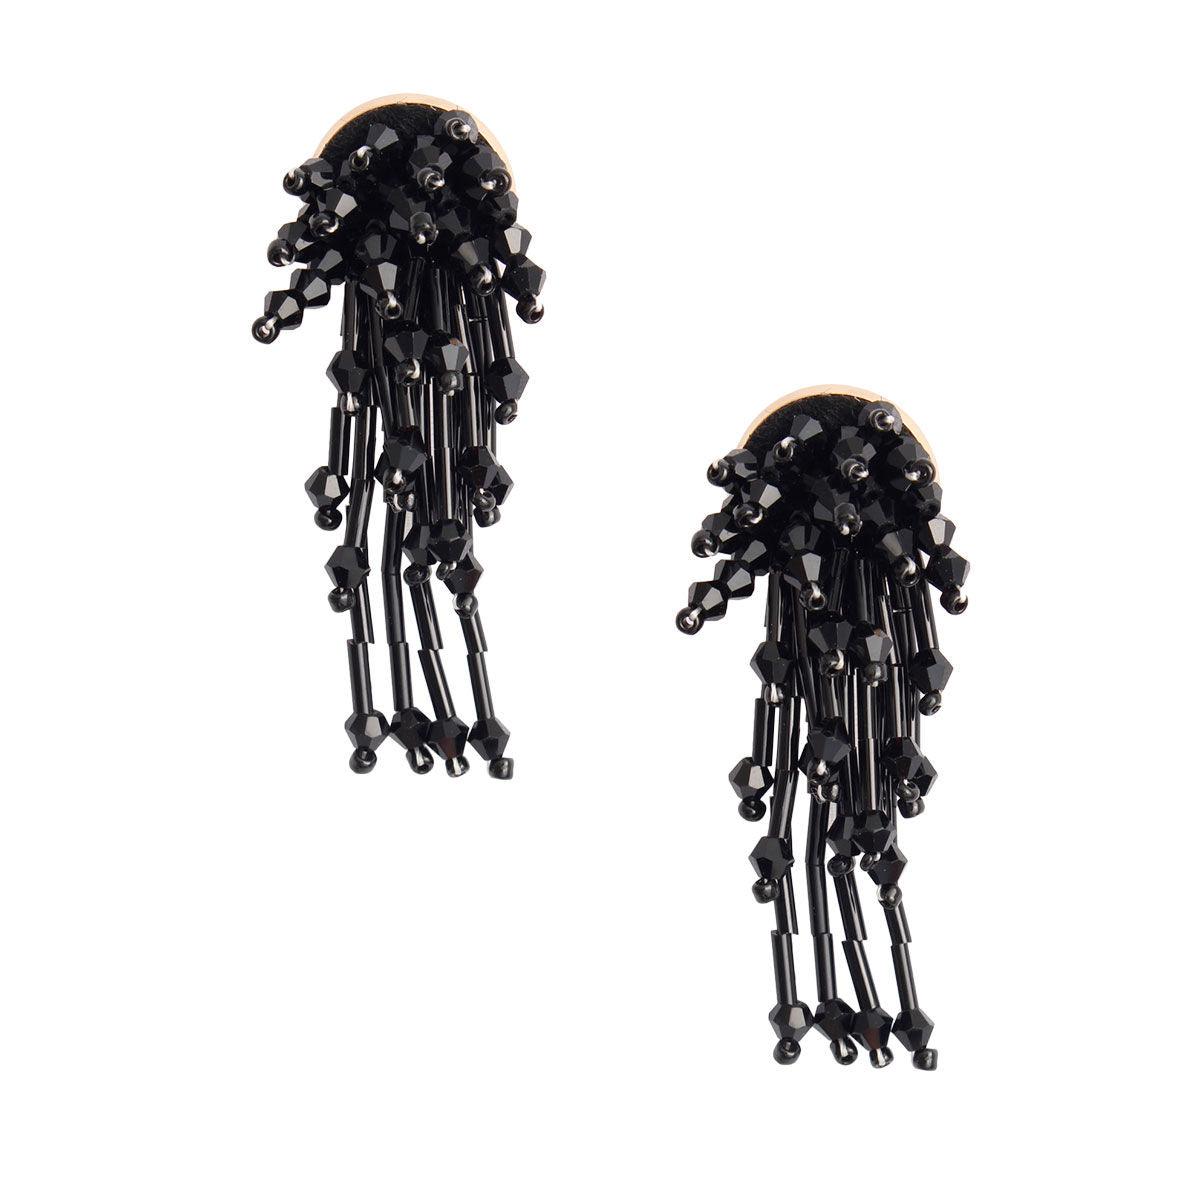 Stunning Black Waterfall Earrings - Must-Have Drop Style Accessory